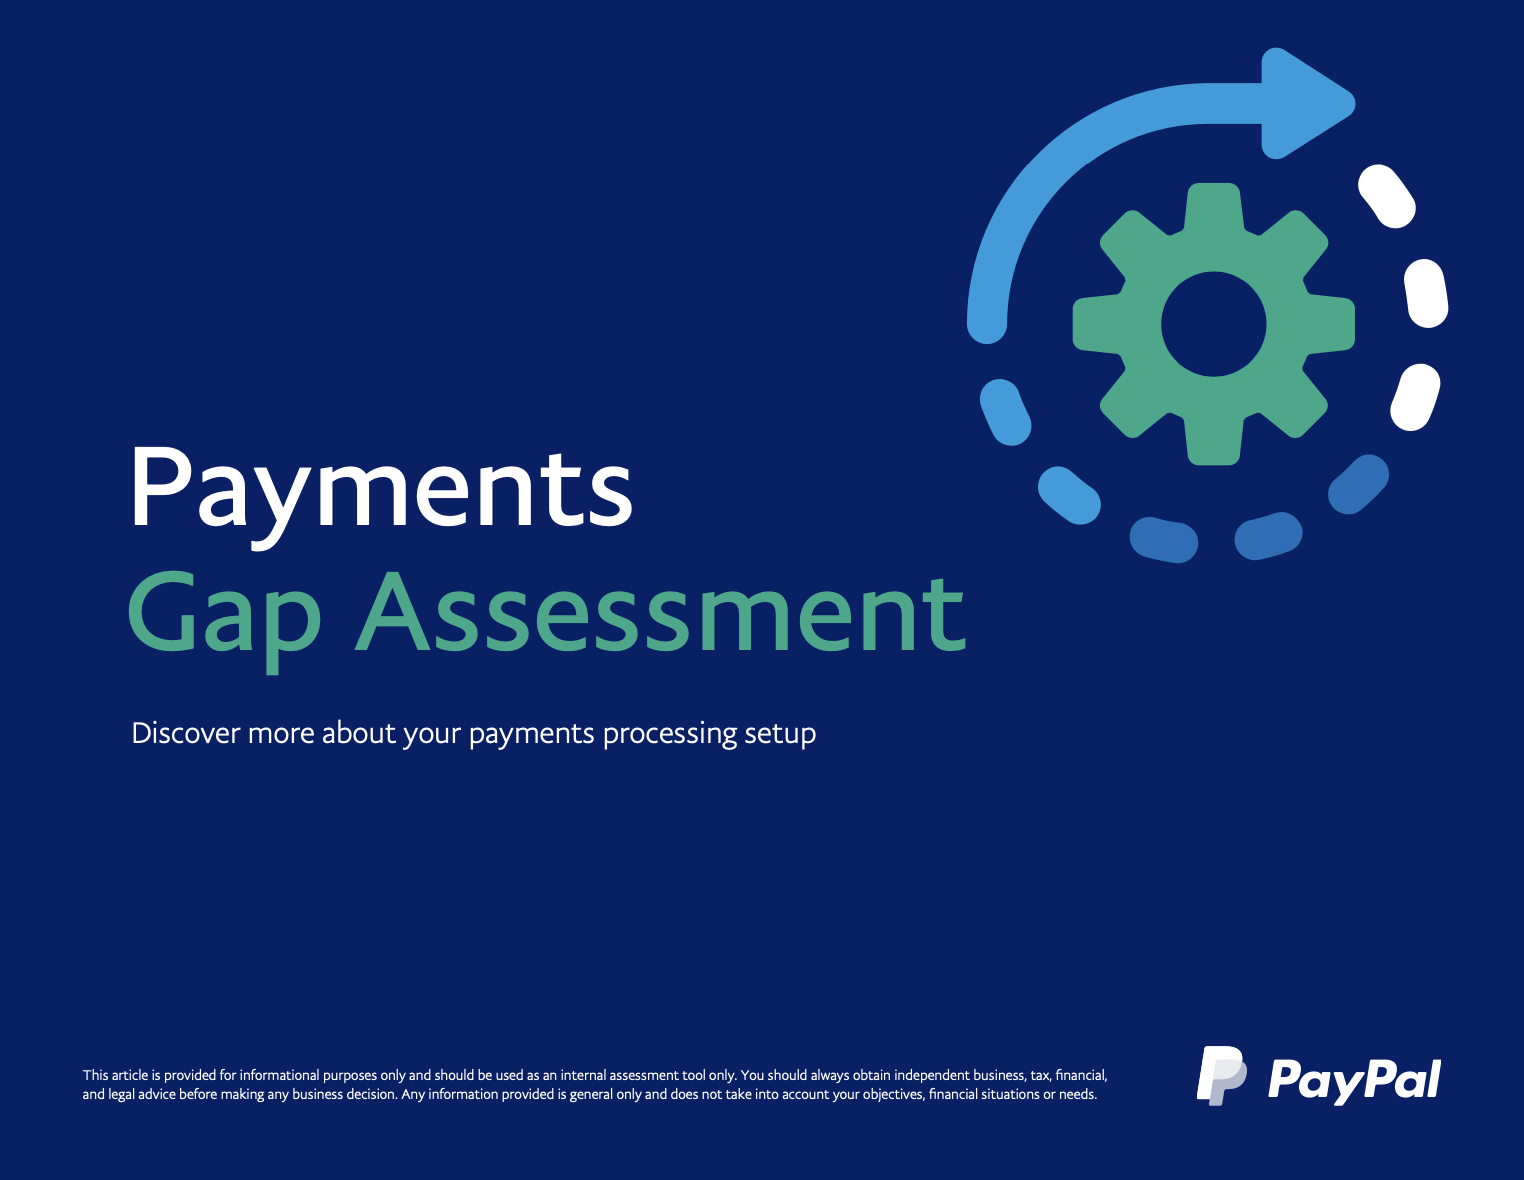 payments gap assessment cover - Paypal make it possible payments gap assessment